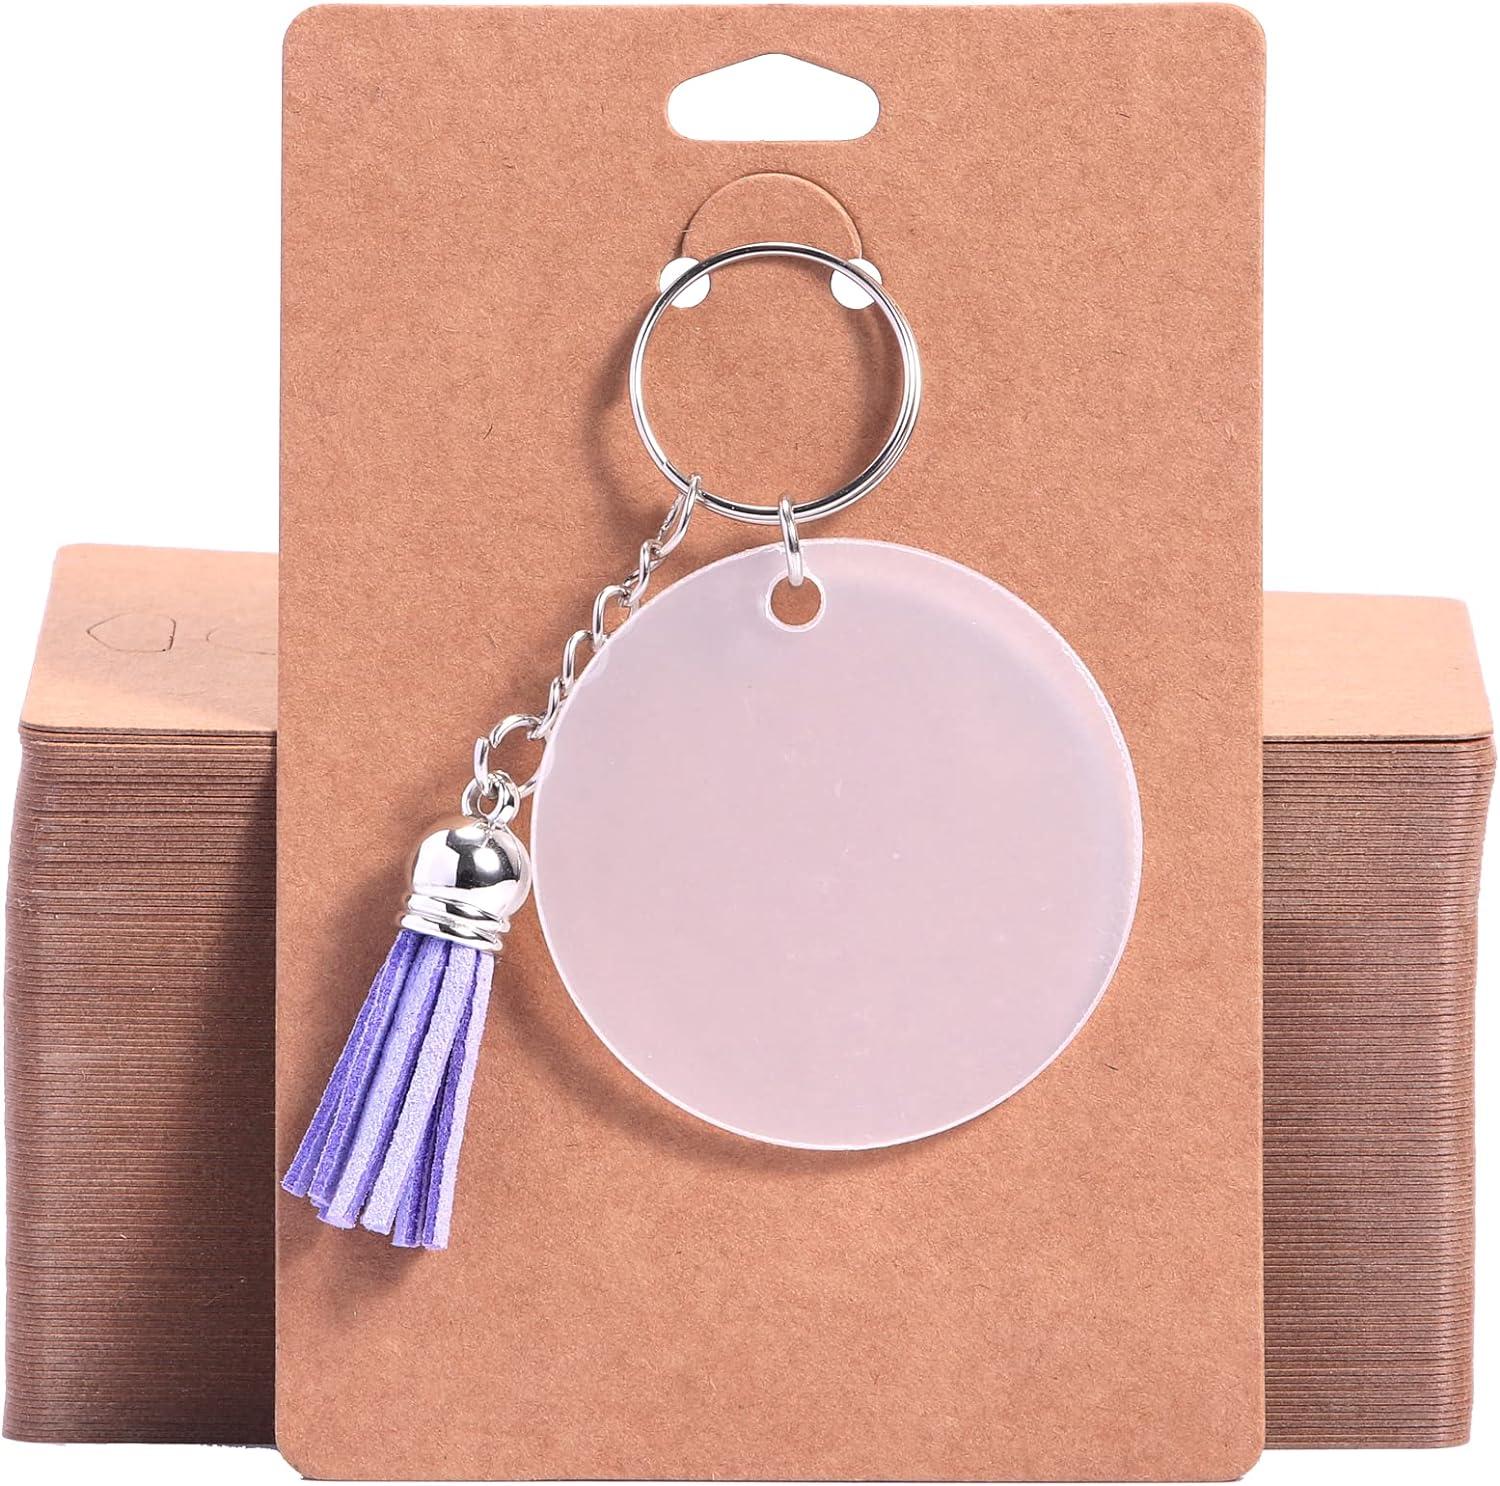 TRYTRYSEE 200 Pieces Brown Color Self-adherent Ring KeyChain Necklace  Bracelet Hairband Body Rings Jewelry Display Cards for Small Business  Jewelry Packaging (Length x Width: 1.6 x 3.9'' Brown) Length x Width: 1.6 x  3